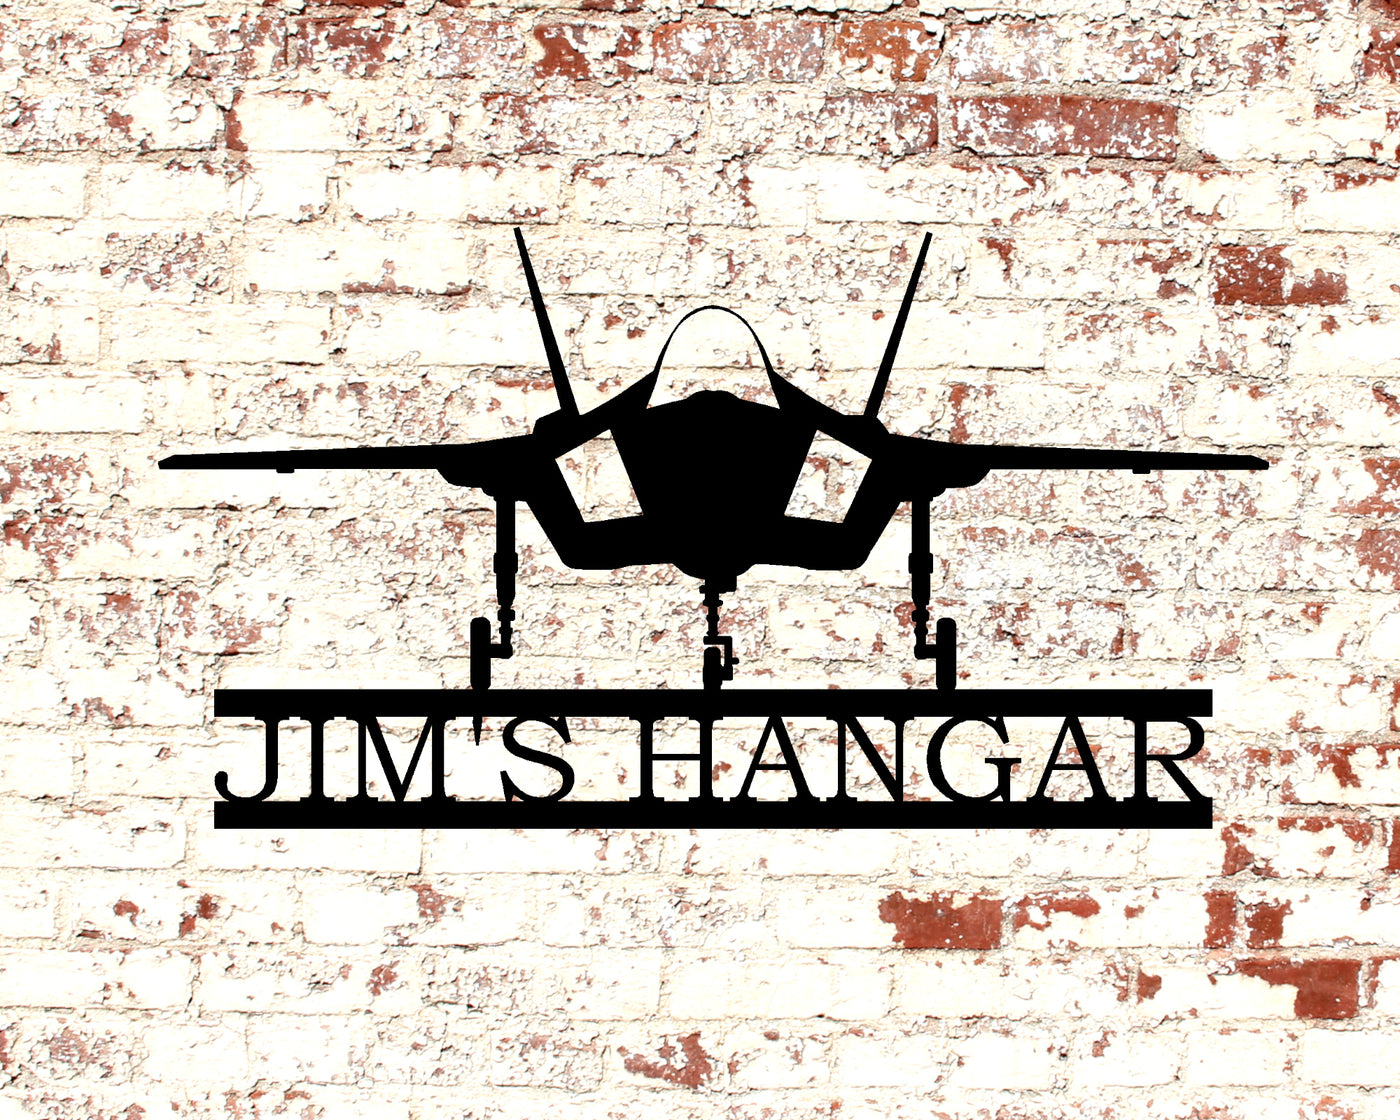 Personalized F-35 Fighter Jet Sign - Madison Iron and Wood - Personalized sign - metal outdoor decor - Steel deocrations - american made products - veteran owned business products - fencing decorations - fencing supplies - custom wall decorations - personalized wall signs - steel - decorative post caps - steel post caps - metal post caps - brackets - structural brackets - home improvement